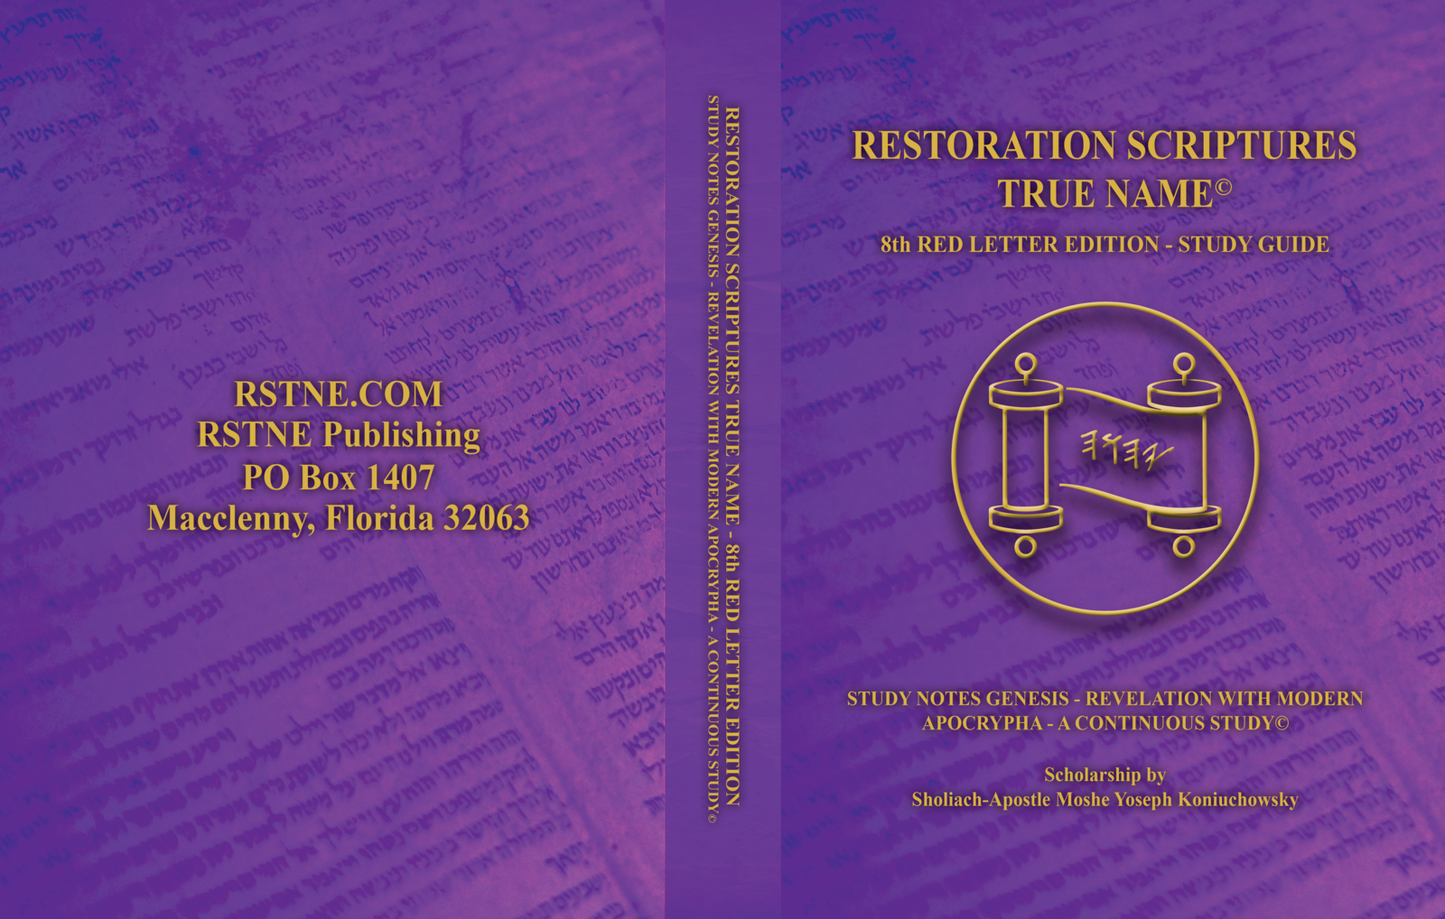 THE RESTORATION SCRIPTURES TRUE NAME EIGHTH EDITION STUDY GUIDE: A Study Tool For The Restoration Scriptures True Name Eighth Edition